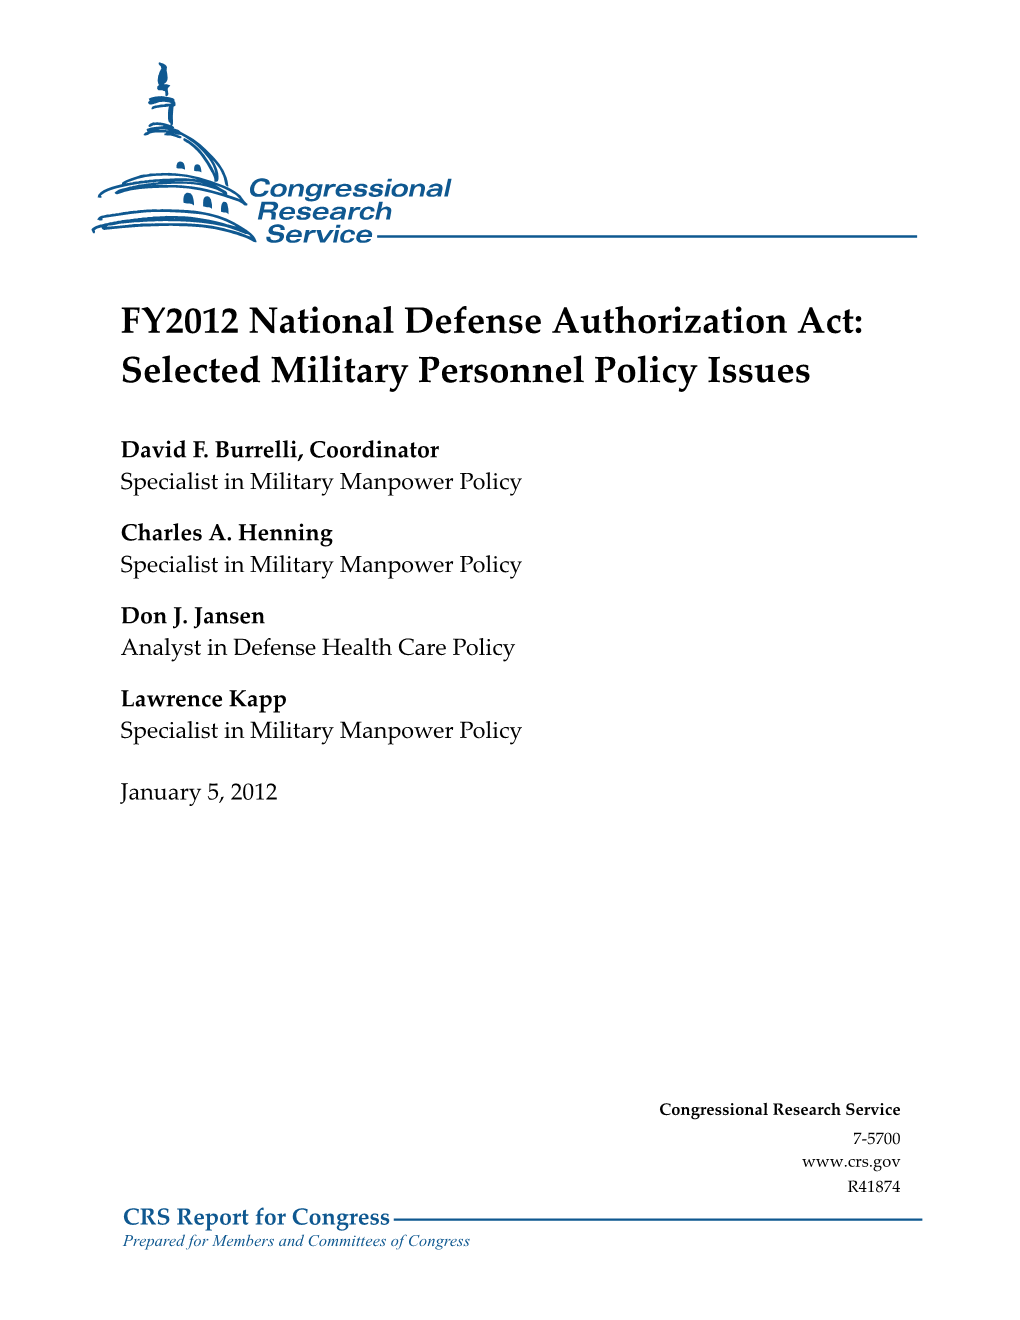 FY2012 National Defense Authorization Act: Selected Military Personnel Policy Issues